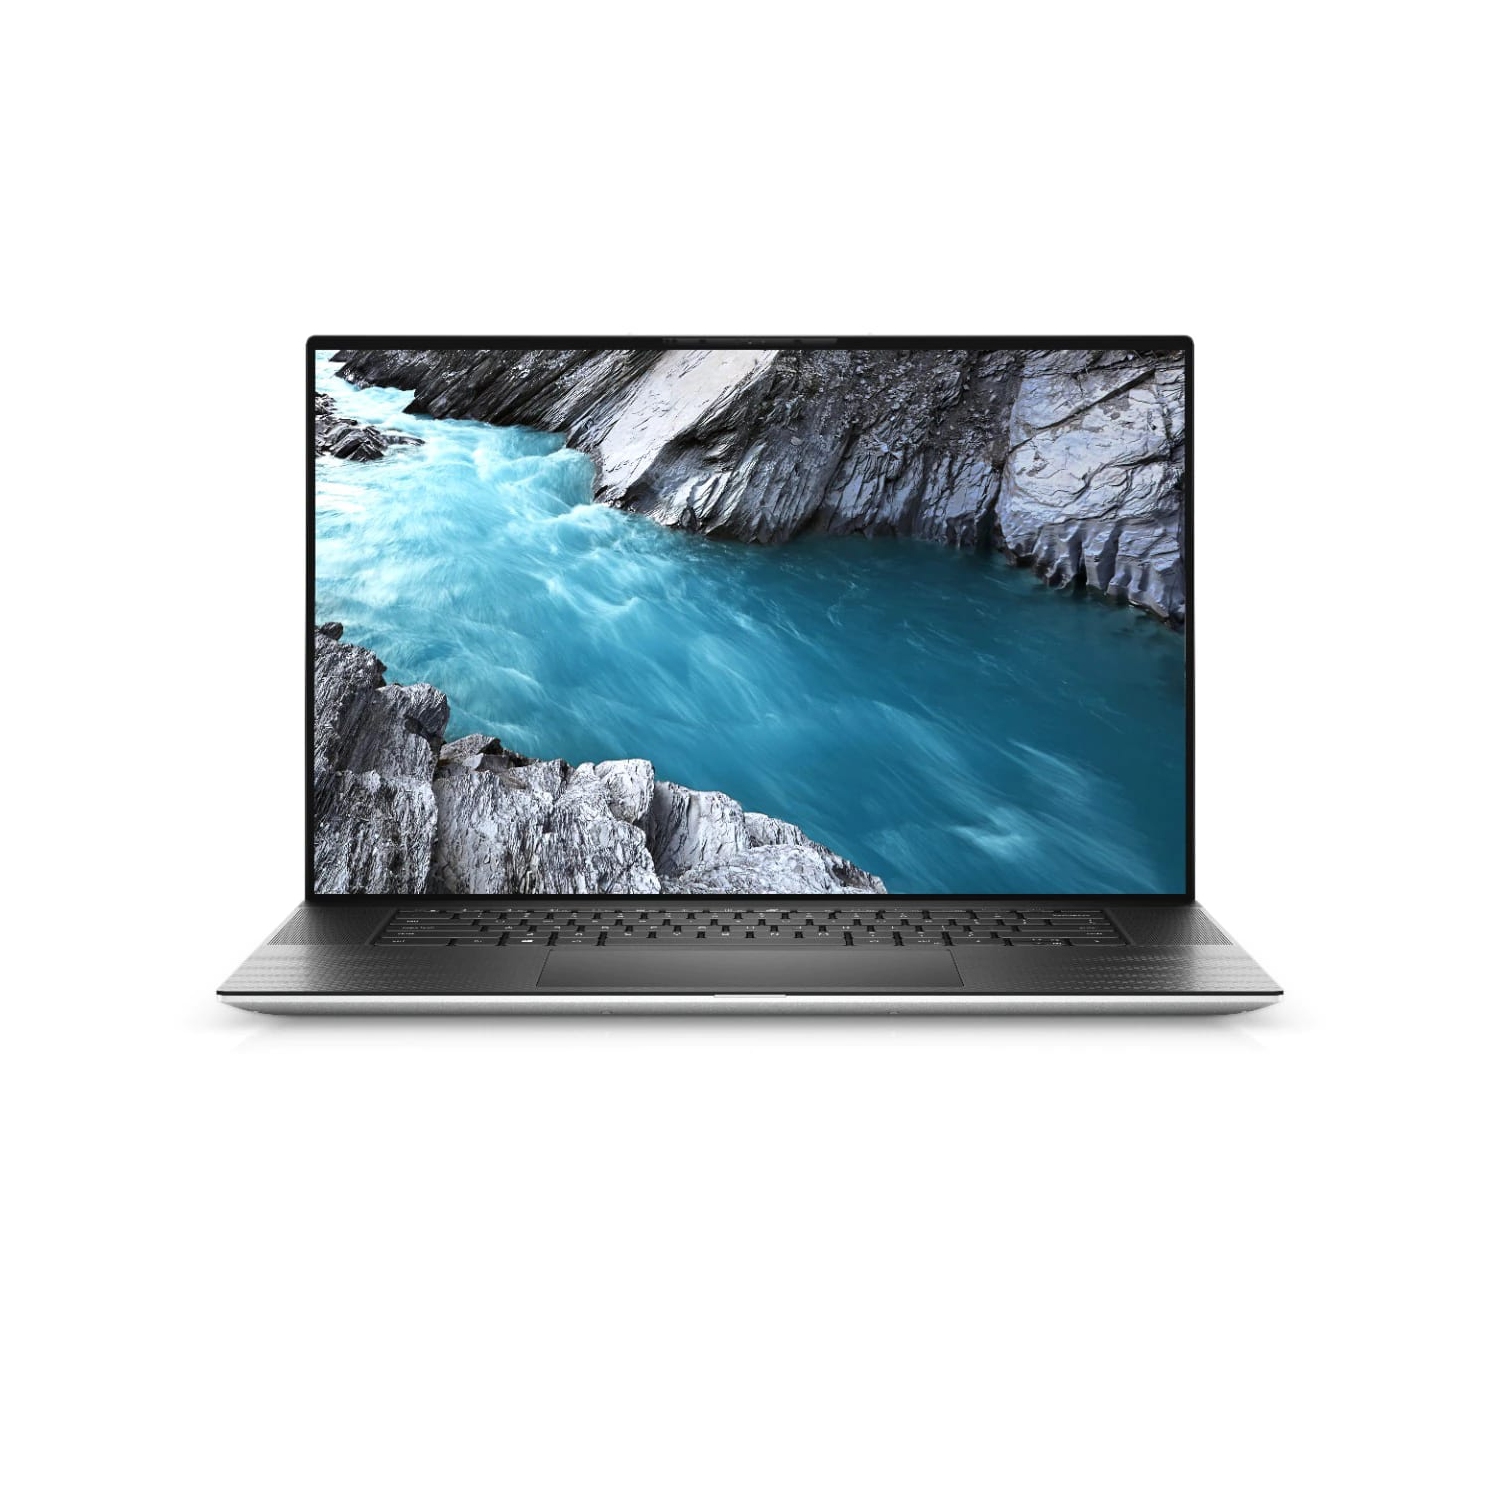 Refurbished (Excellent) - Dell XPS 17 9700 Laptop (2020) | 17" FHD+ | Core i7 - 1TB SSD - 64GB RAM - RTX 2060 | 8 Cores @ 5.1 GHz - 10th Gen CPU Certified Refurbished